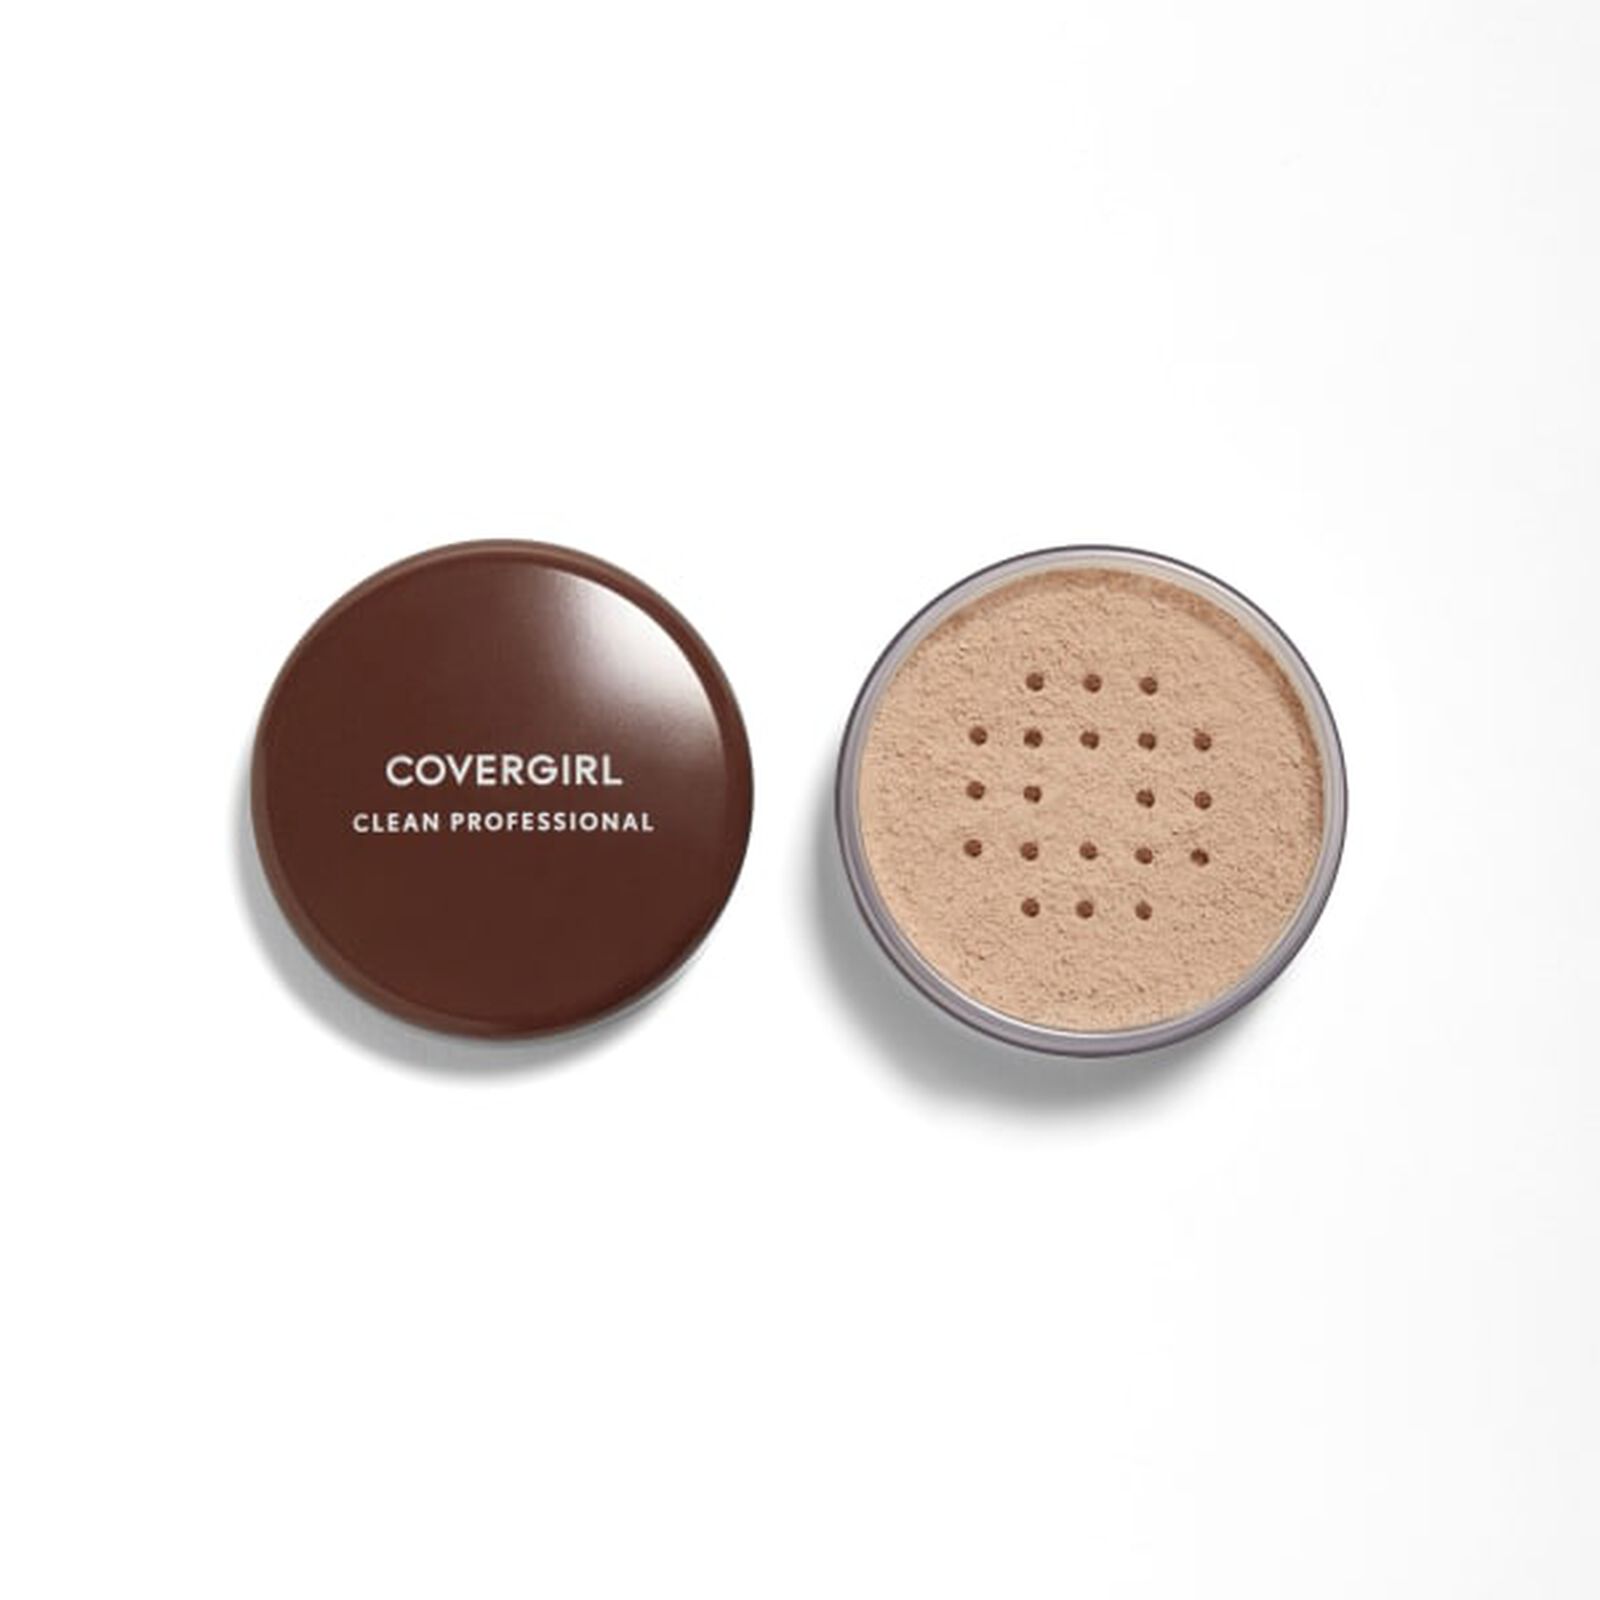 Covergirl Clean Professional Loose Finishing Powder